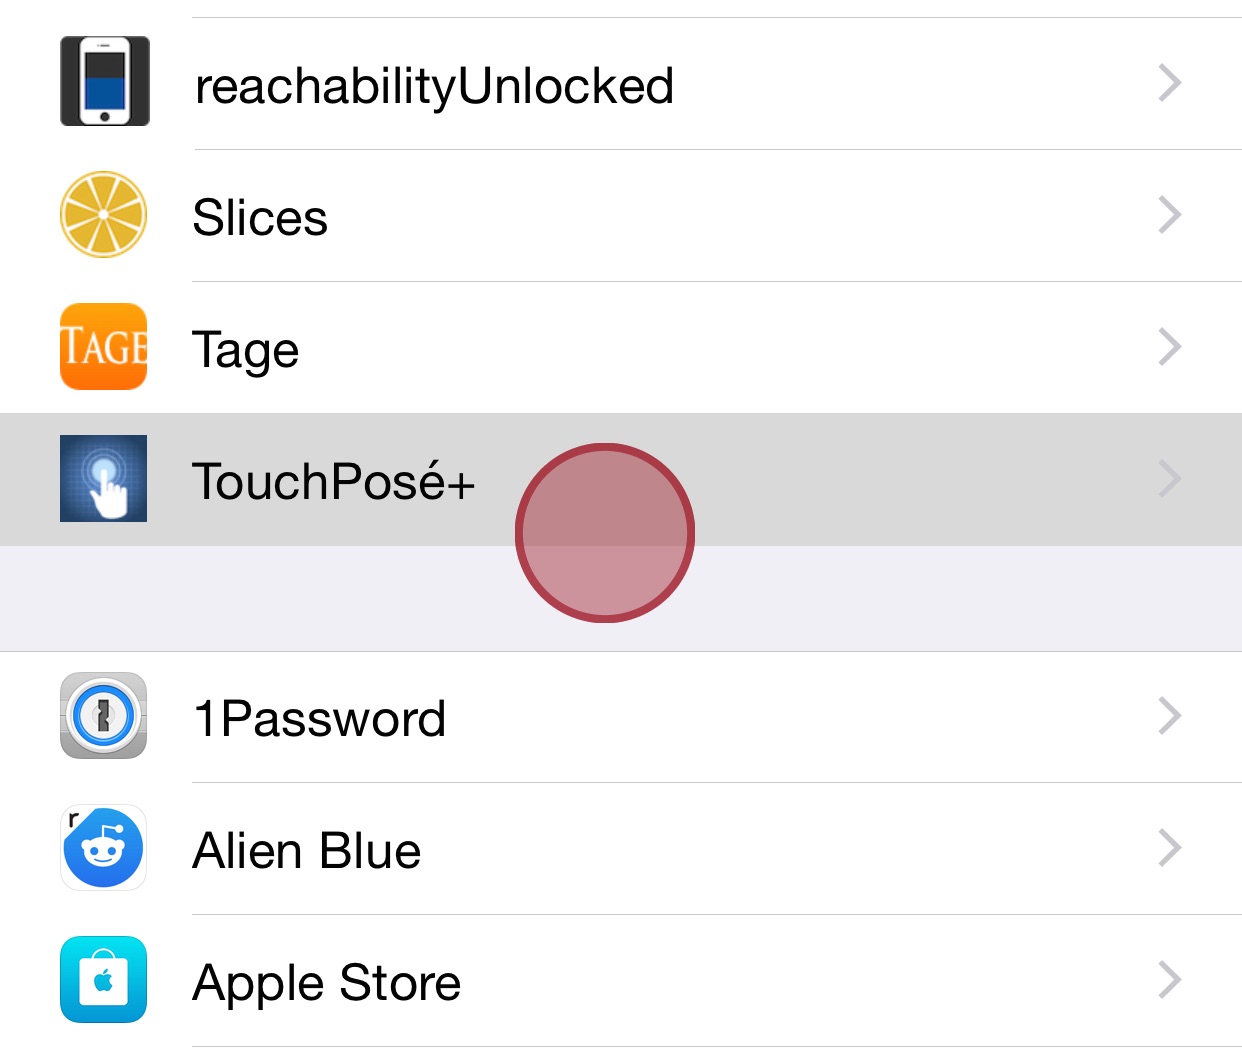 TouchPose+